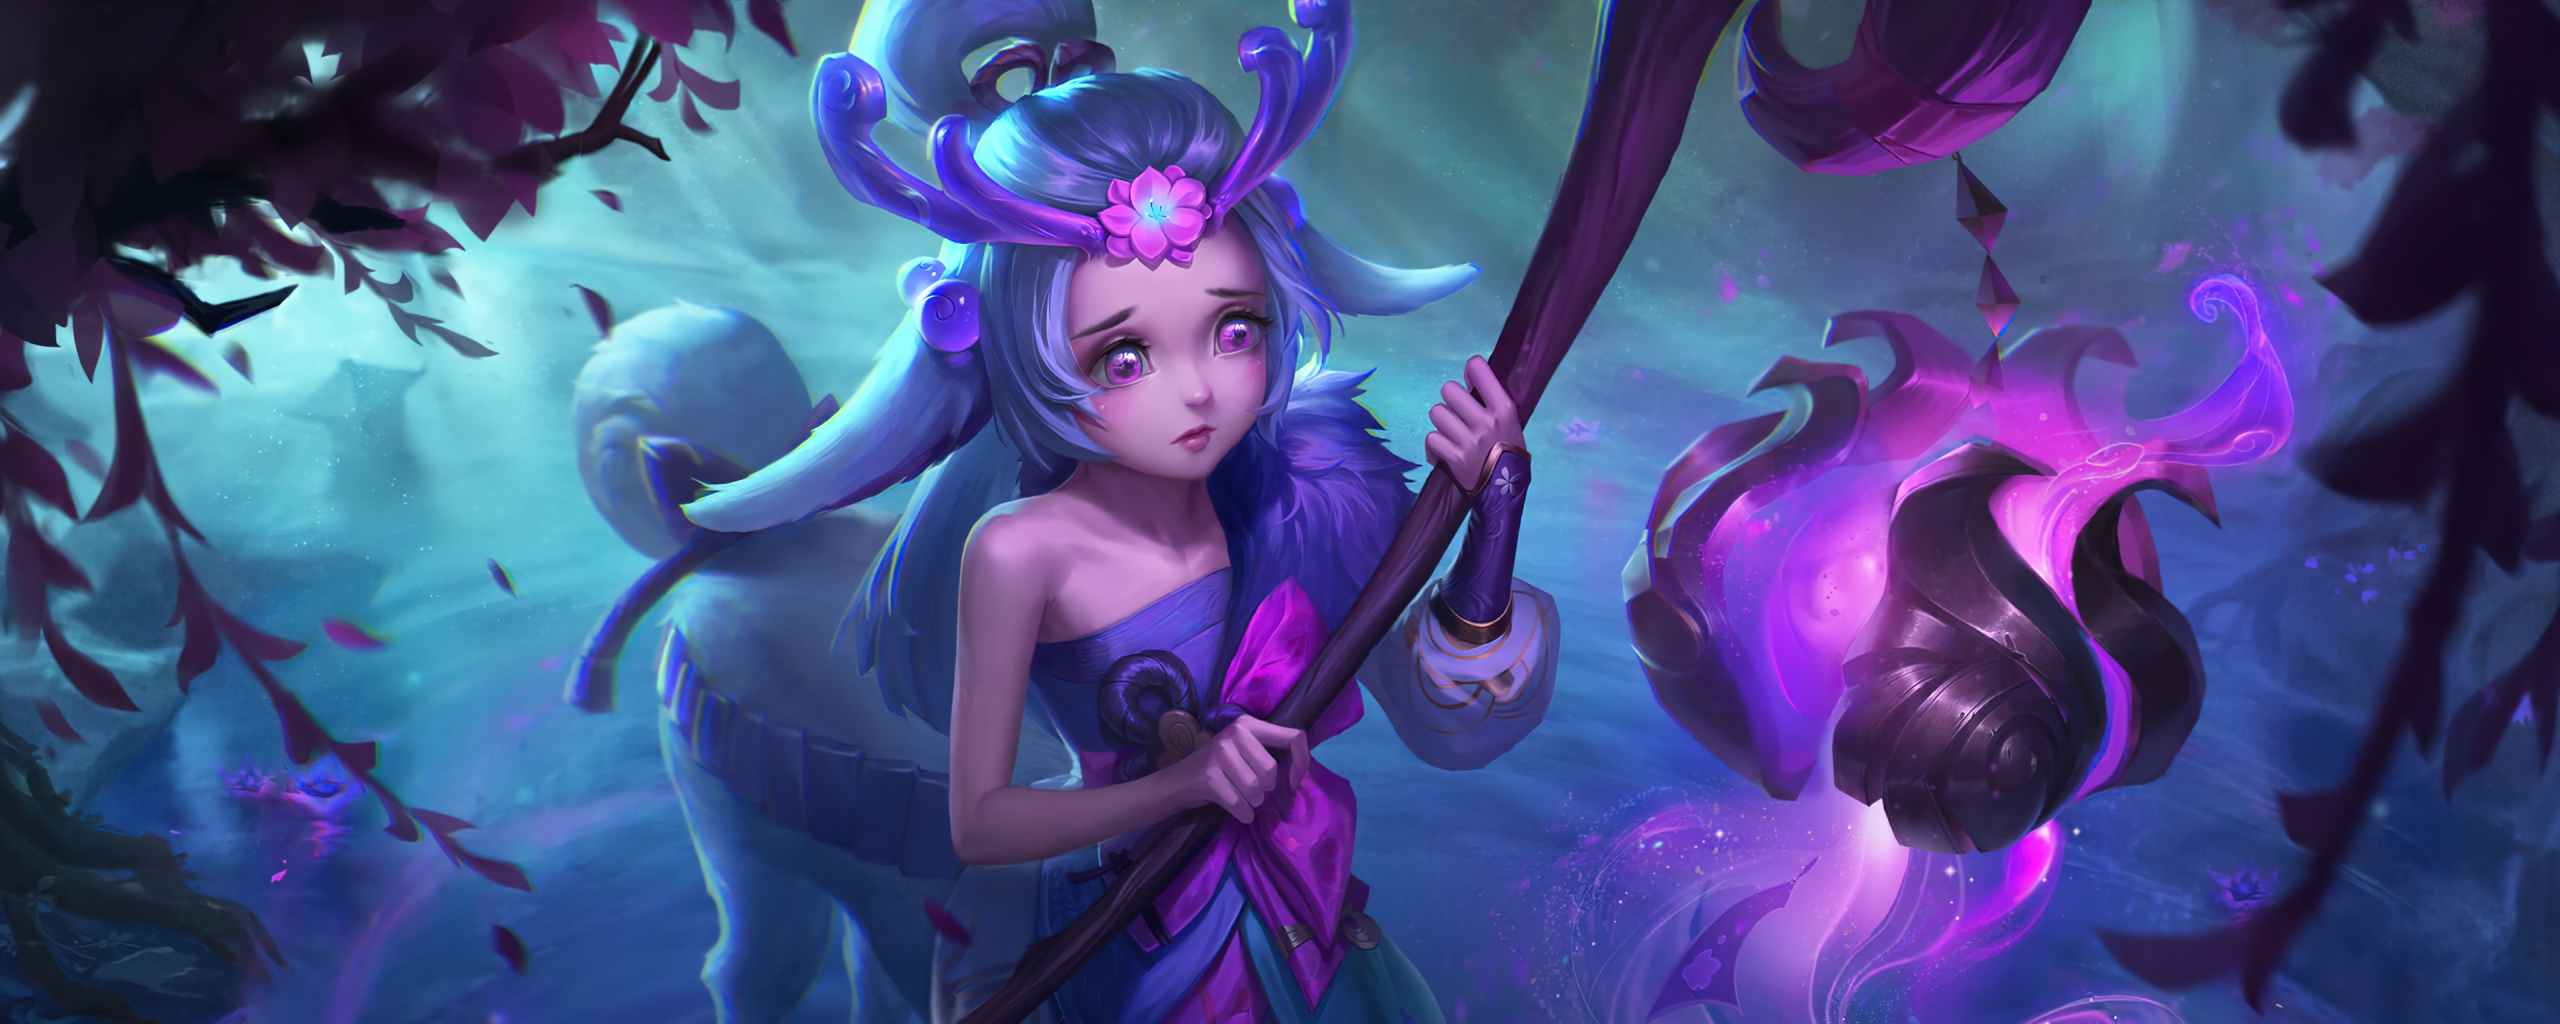 2560x1024 Resolution Lillia HD League Of Legends Gaming 2560x1024 ...